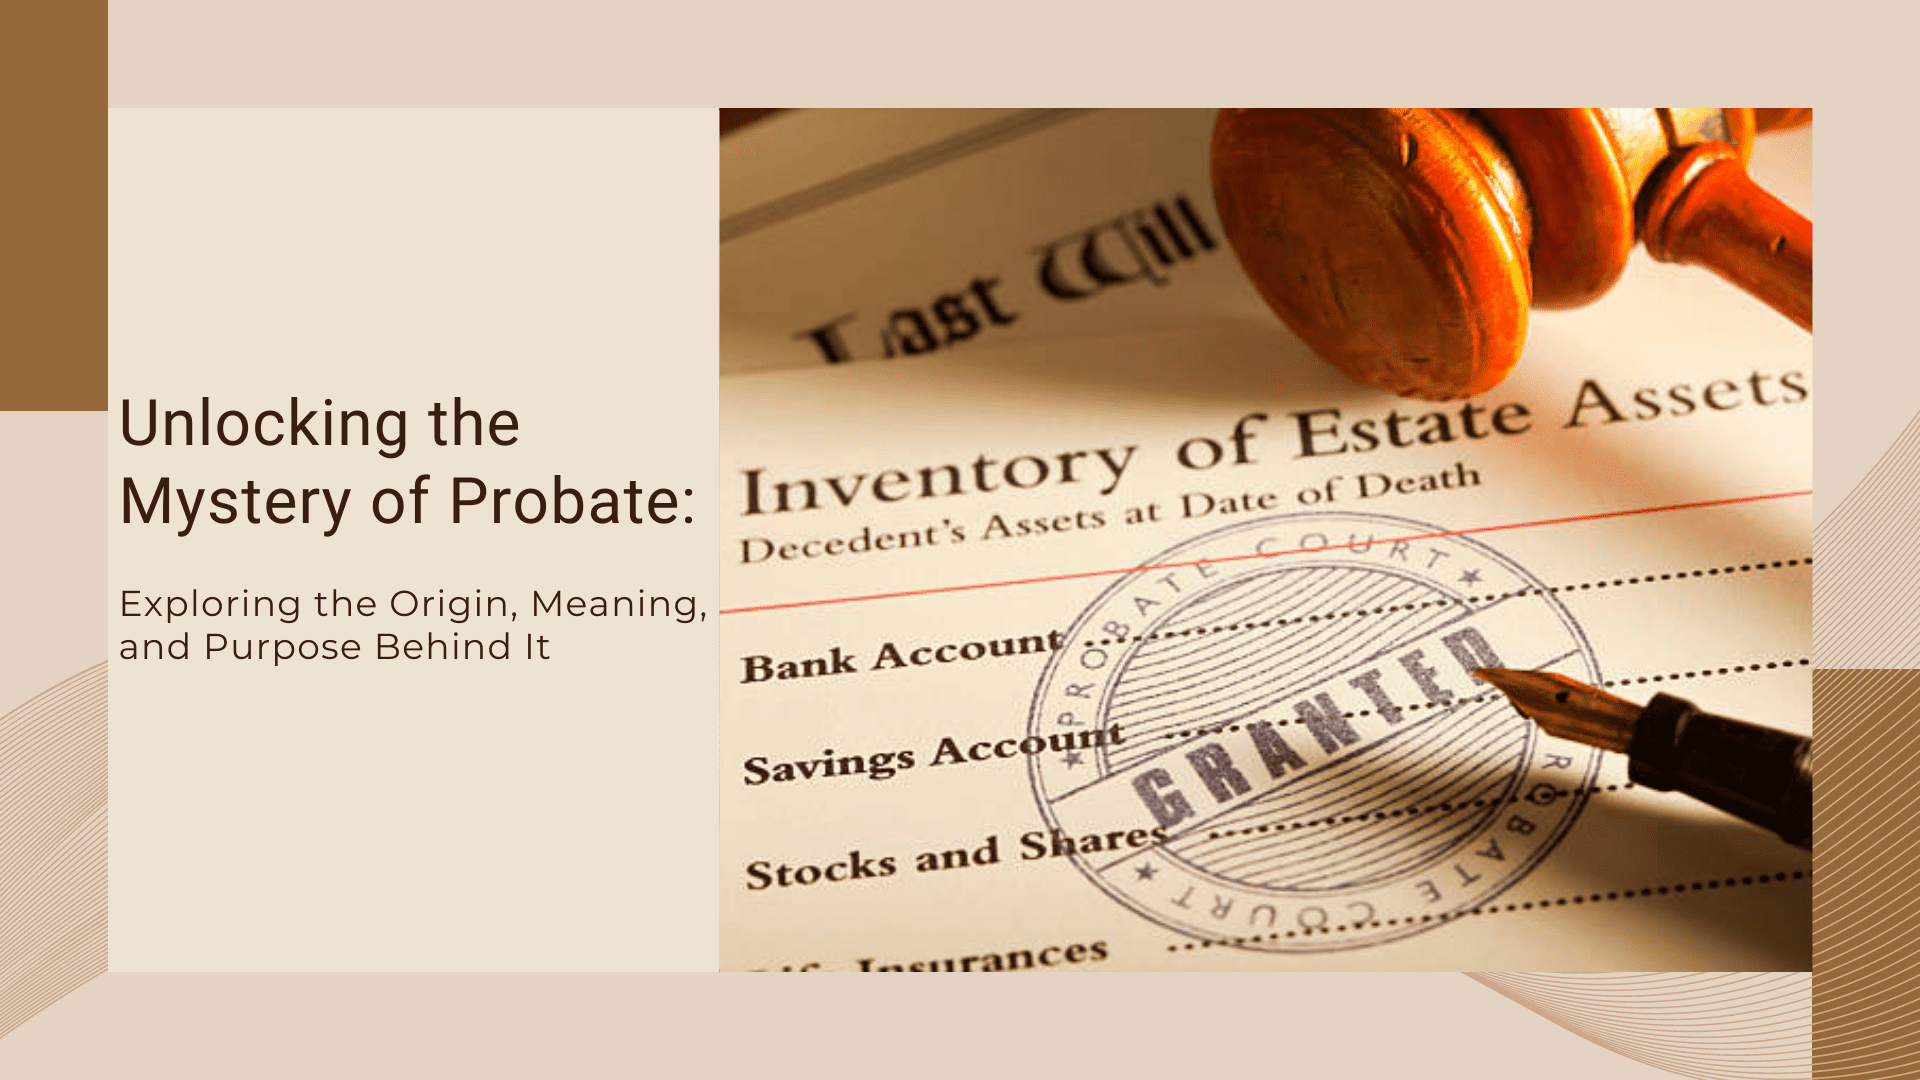 Unlocking the Mystery of Probate